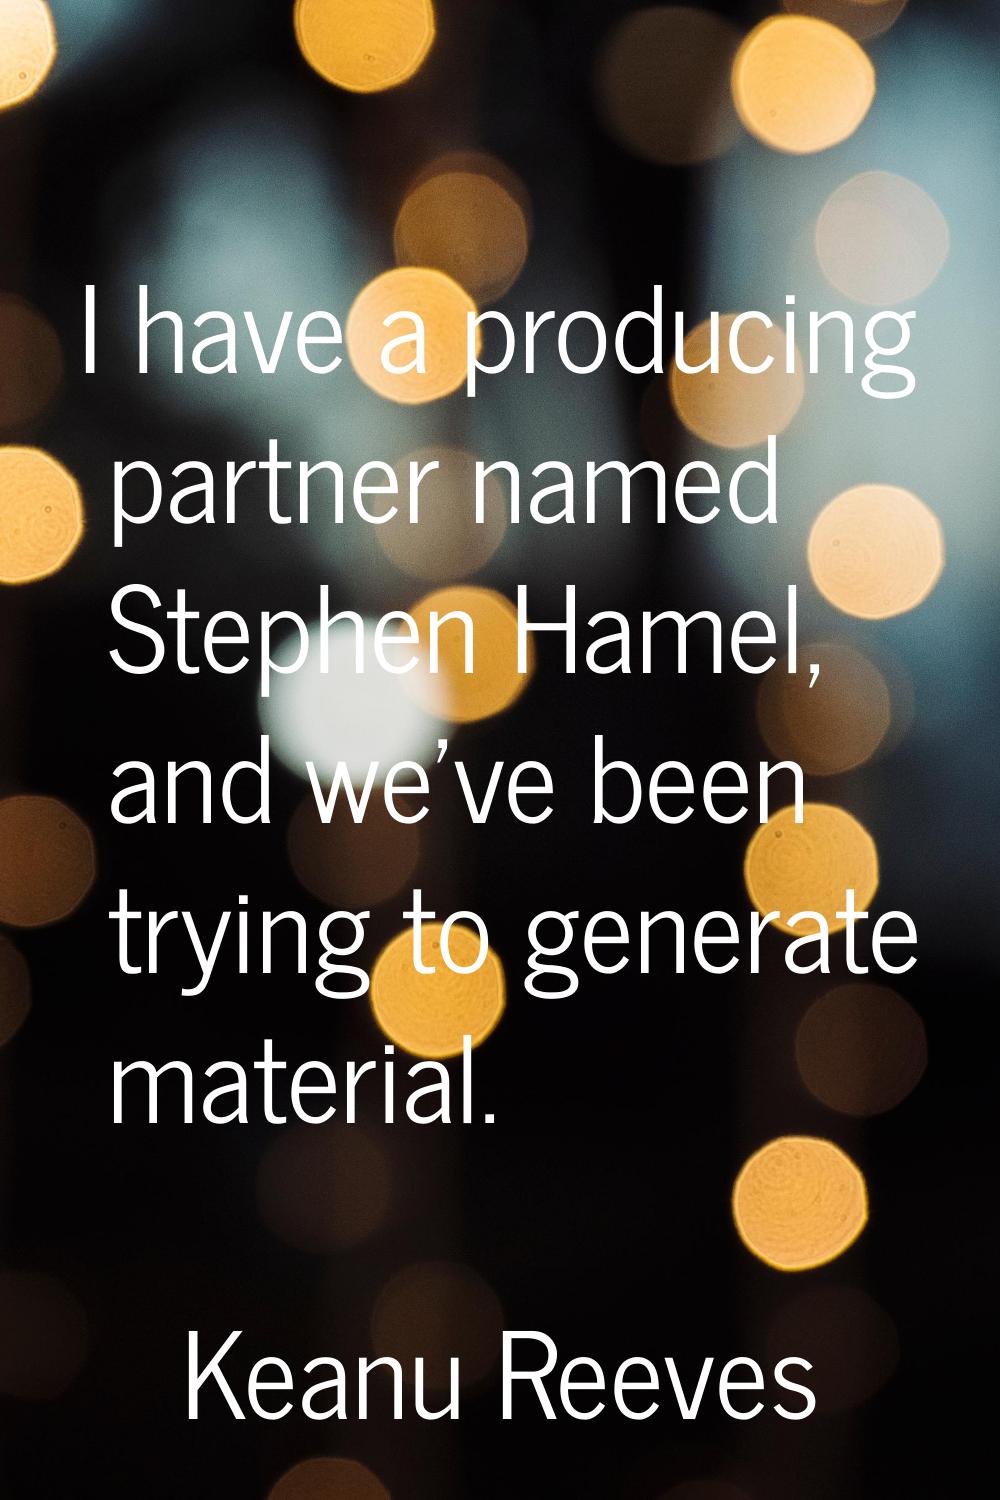 I have a producing partner named Stephen Hamel, and we've been trying to generate material.